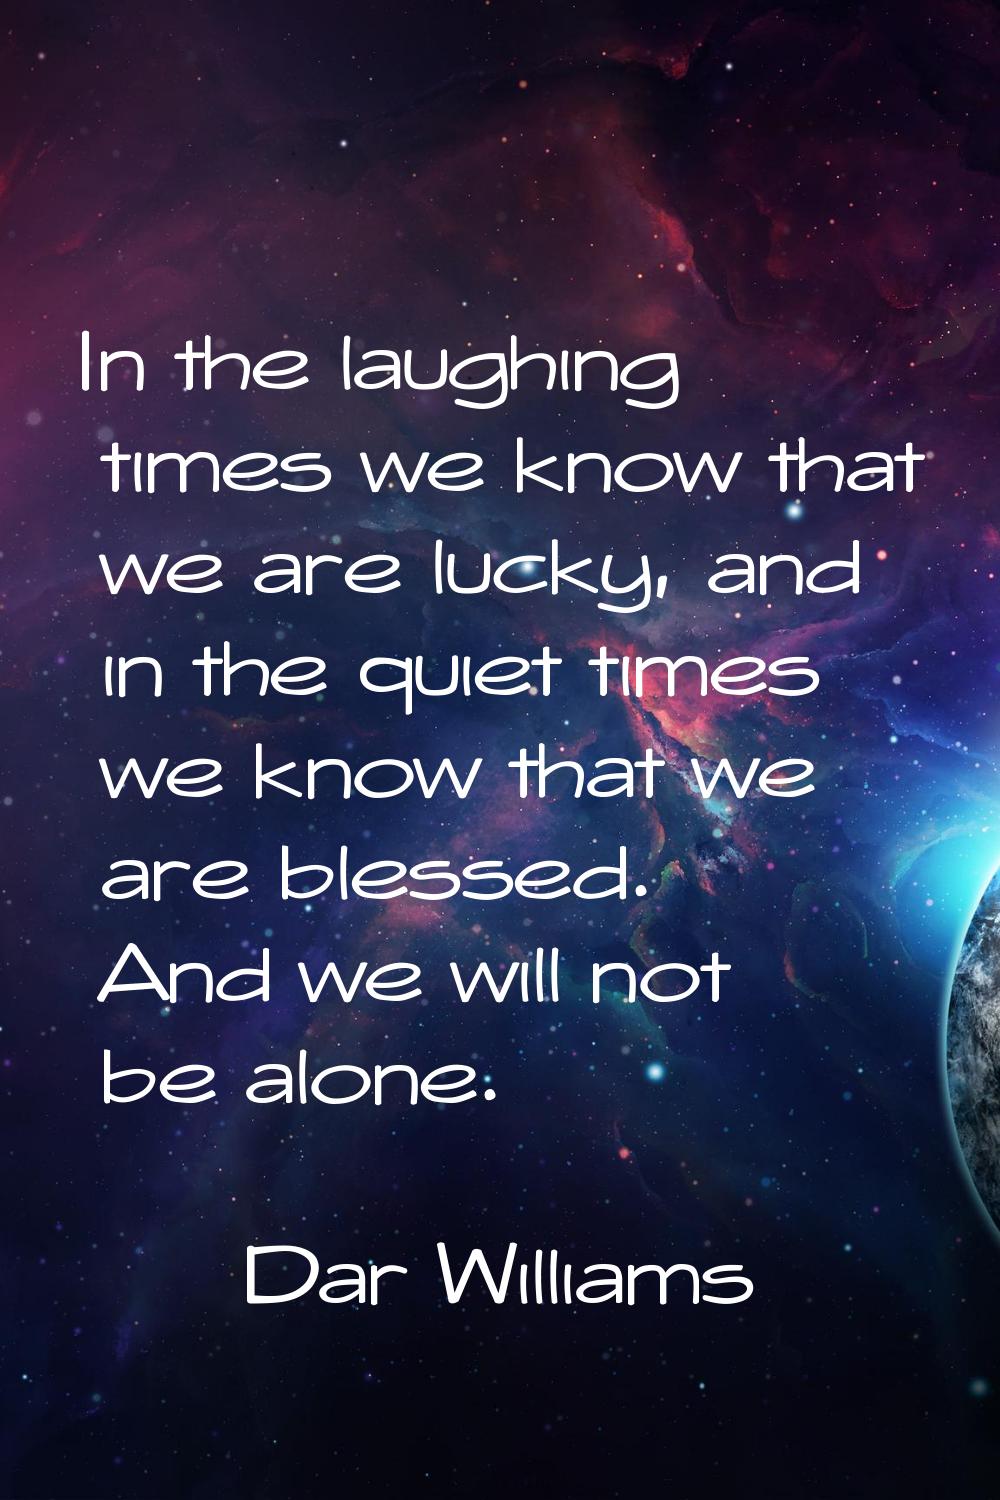 In the laughing times we know that we are lucky, and in the quiet times we know that we are blessed